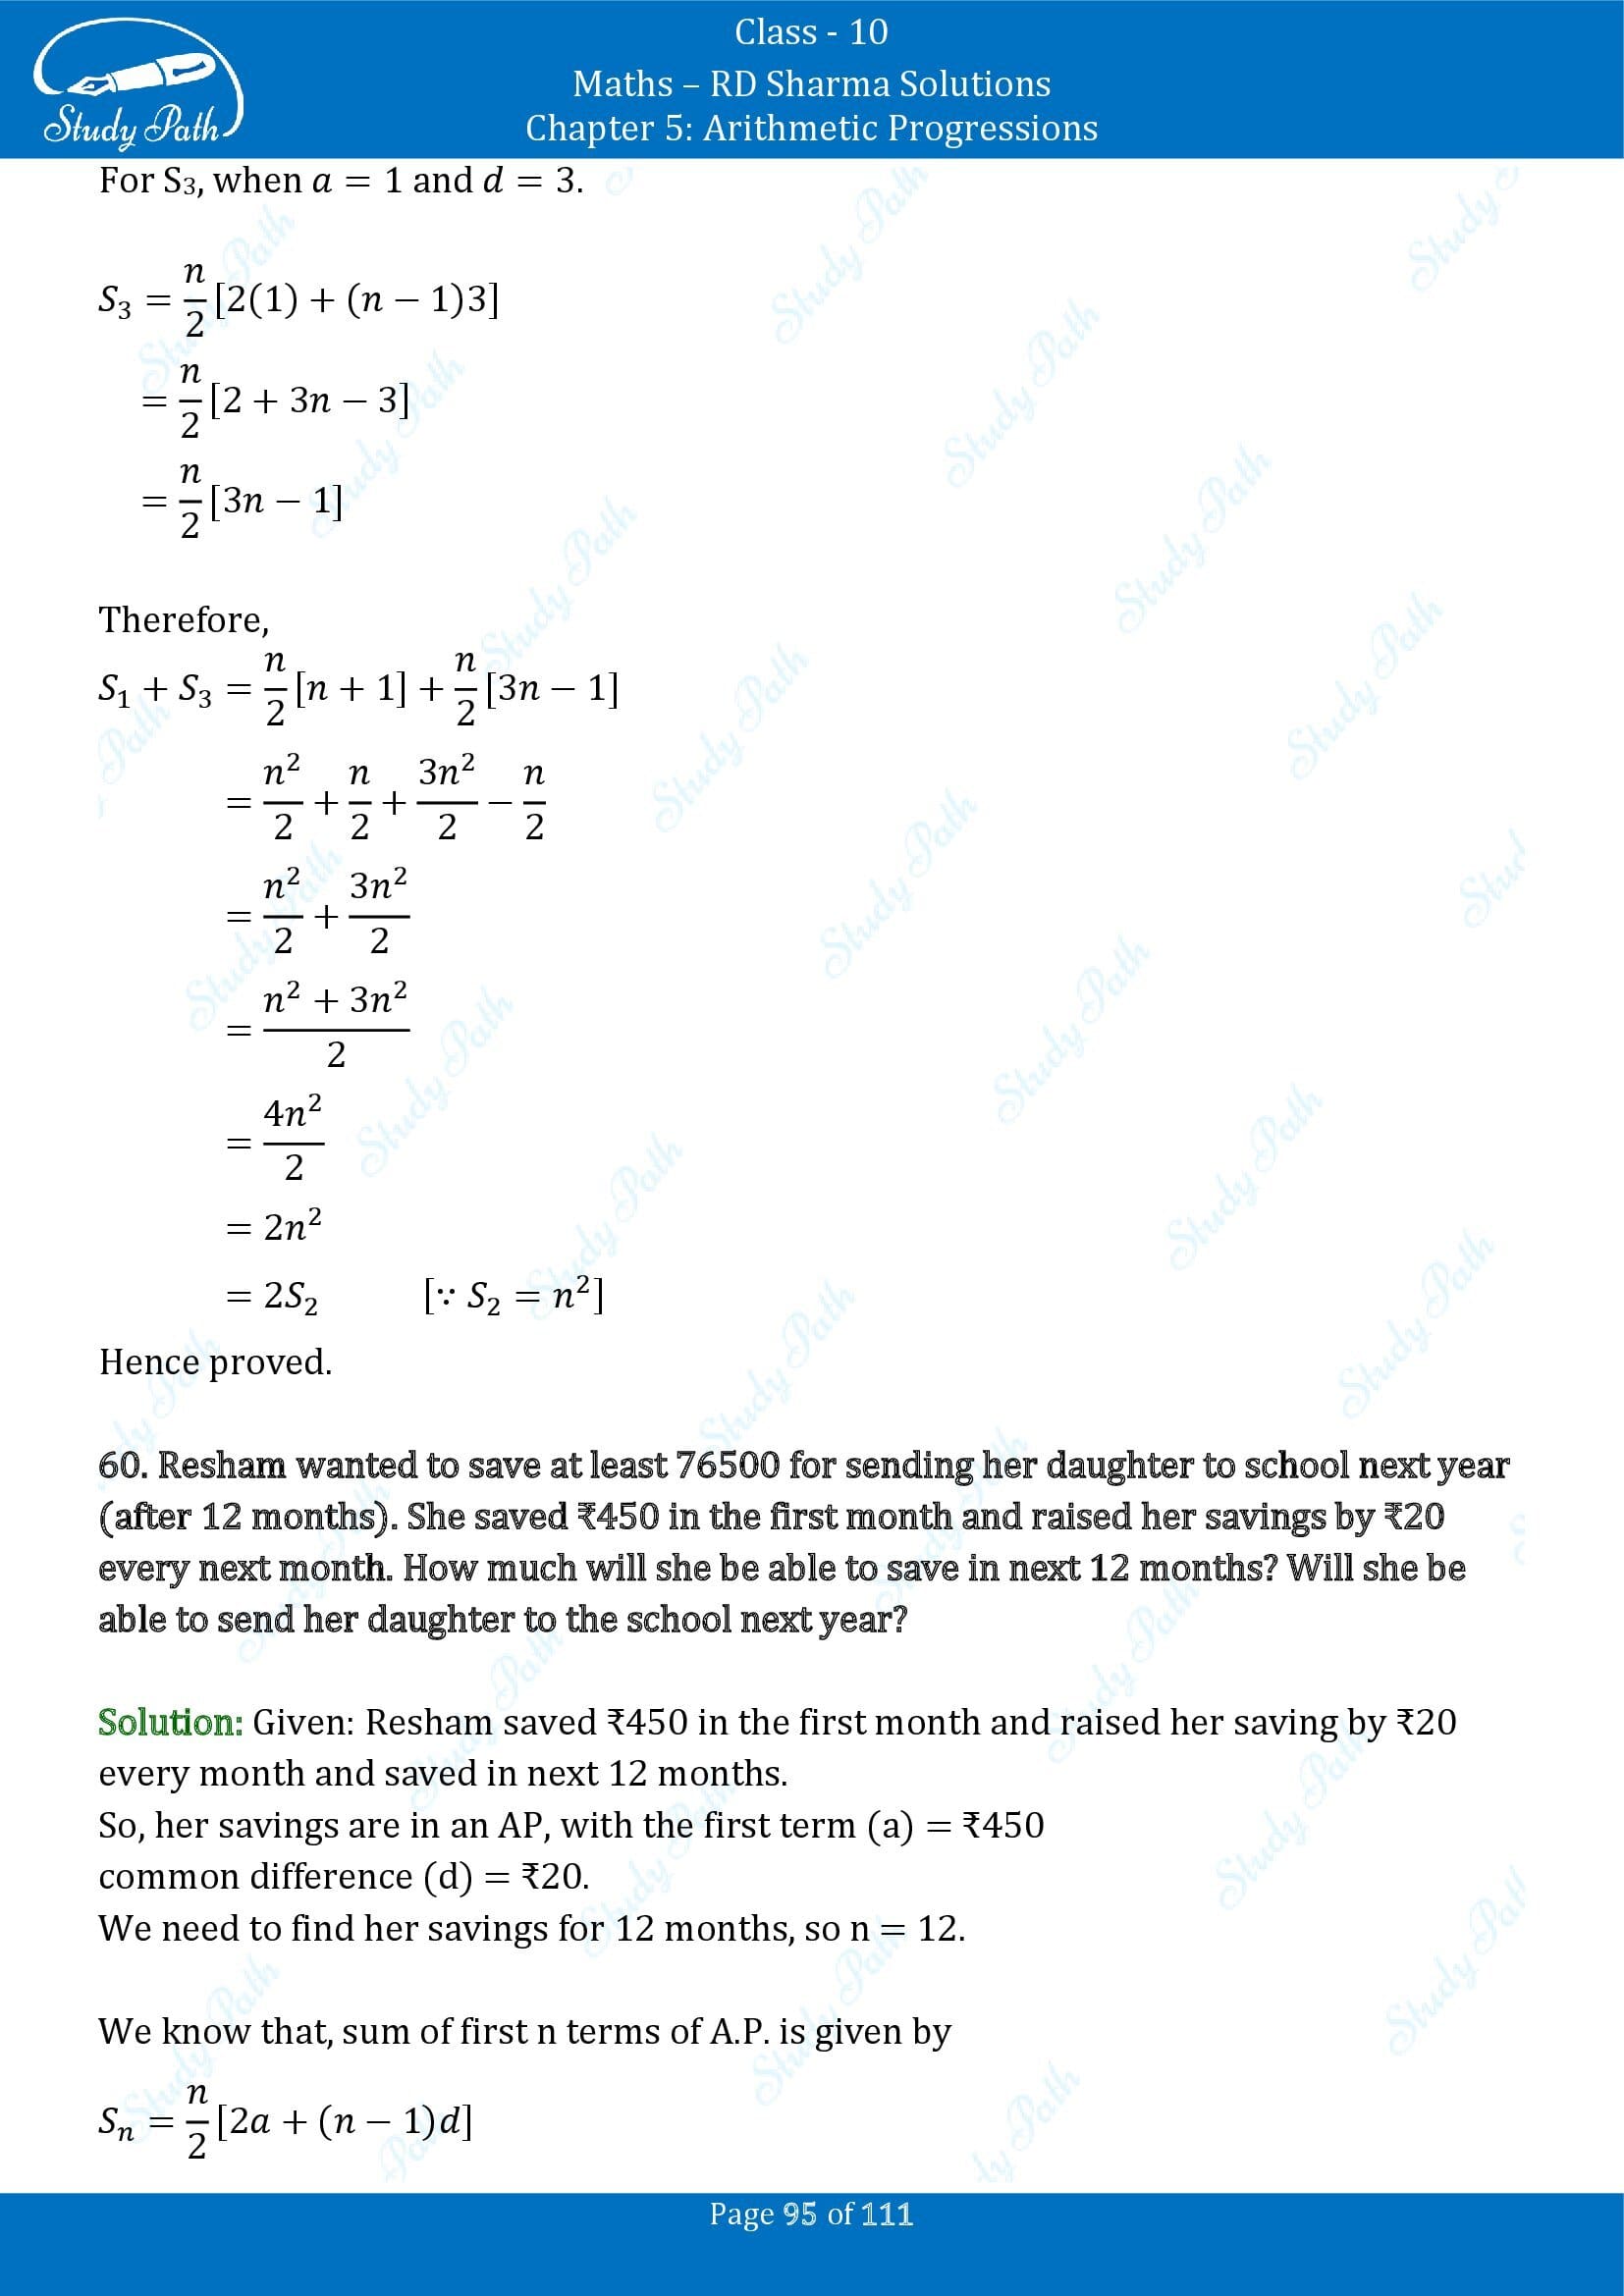 RD Sharma Solutions Class 10 Chapter 5 Arithmetic Progressions Exercise 5.6 00095